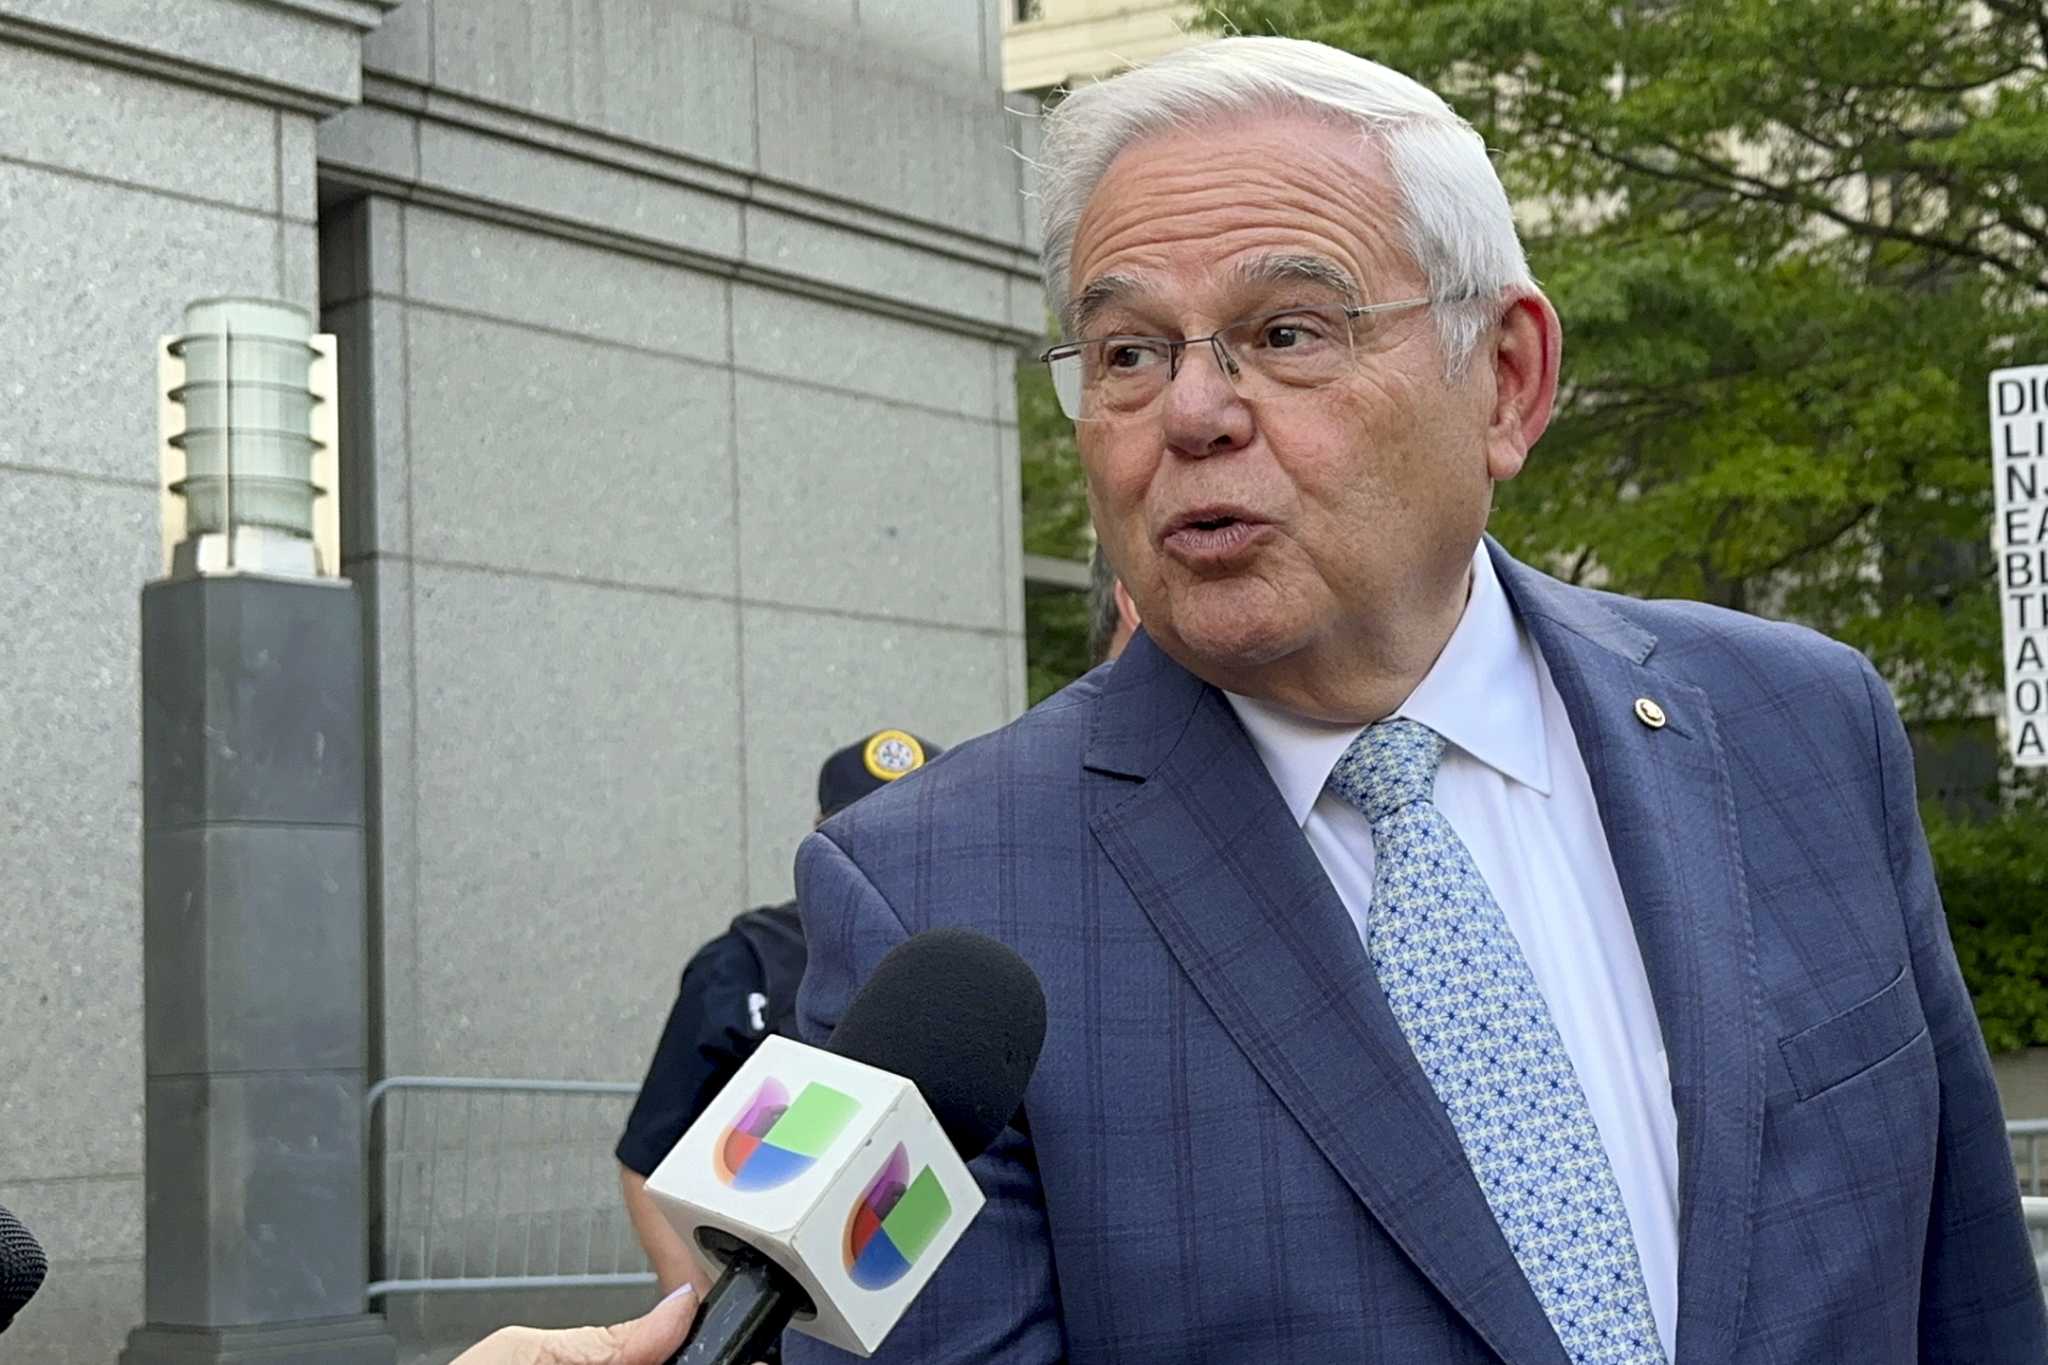 Bob Menendez says he didn’t testify because prosecution failed to prove its bribery case against him